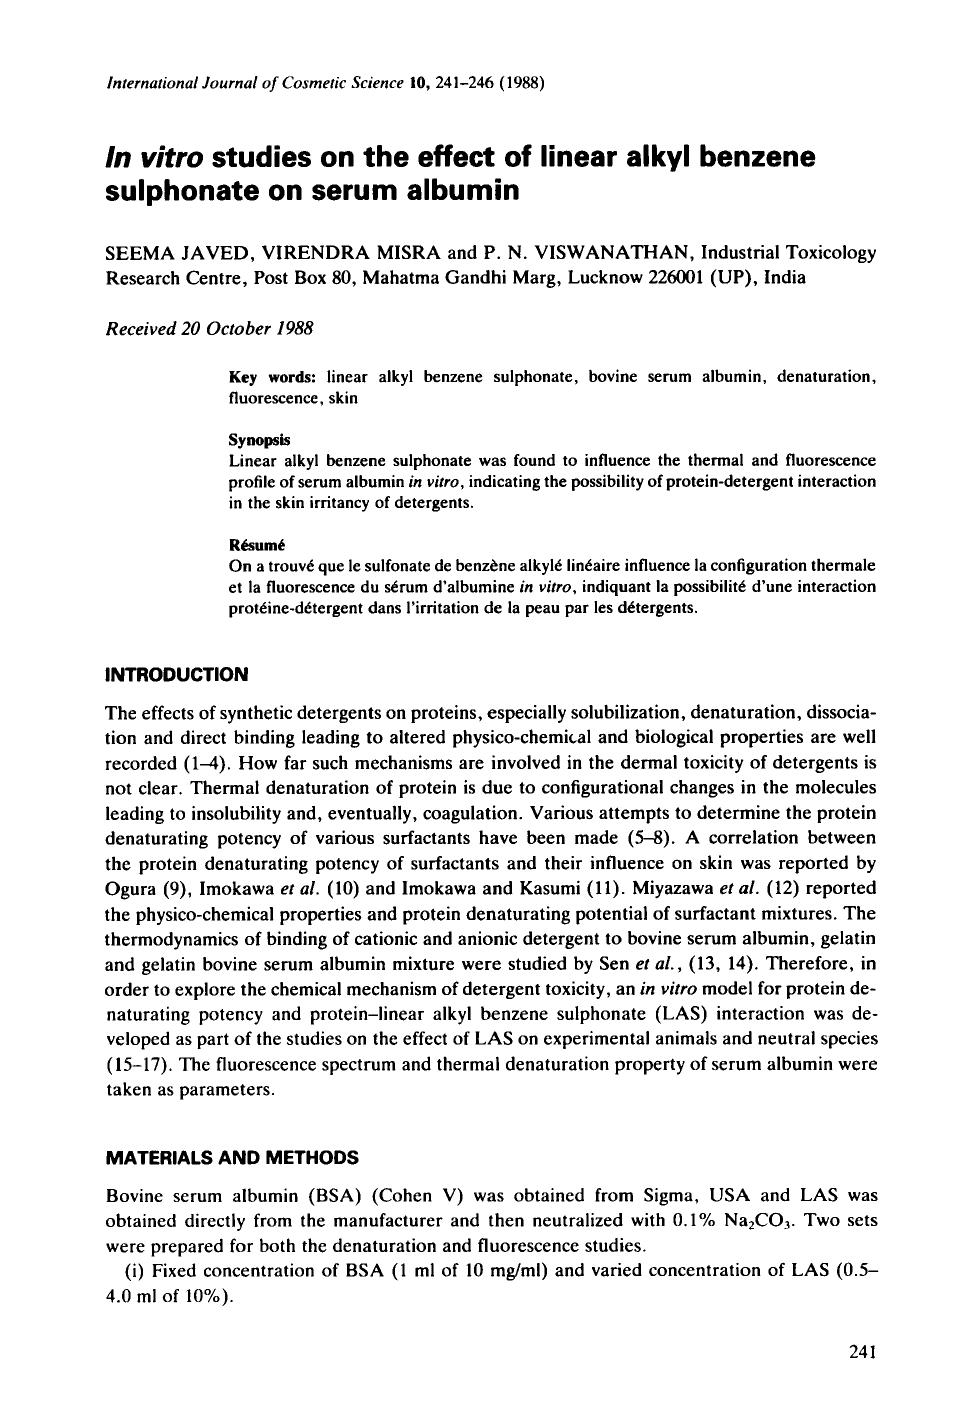 In vitro studies on the effect of linear alkyl benzene sulphonate on serum albumin by Unknown